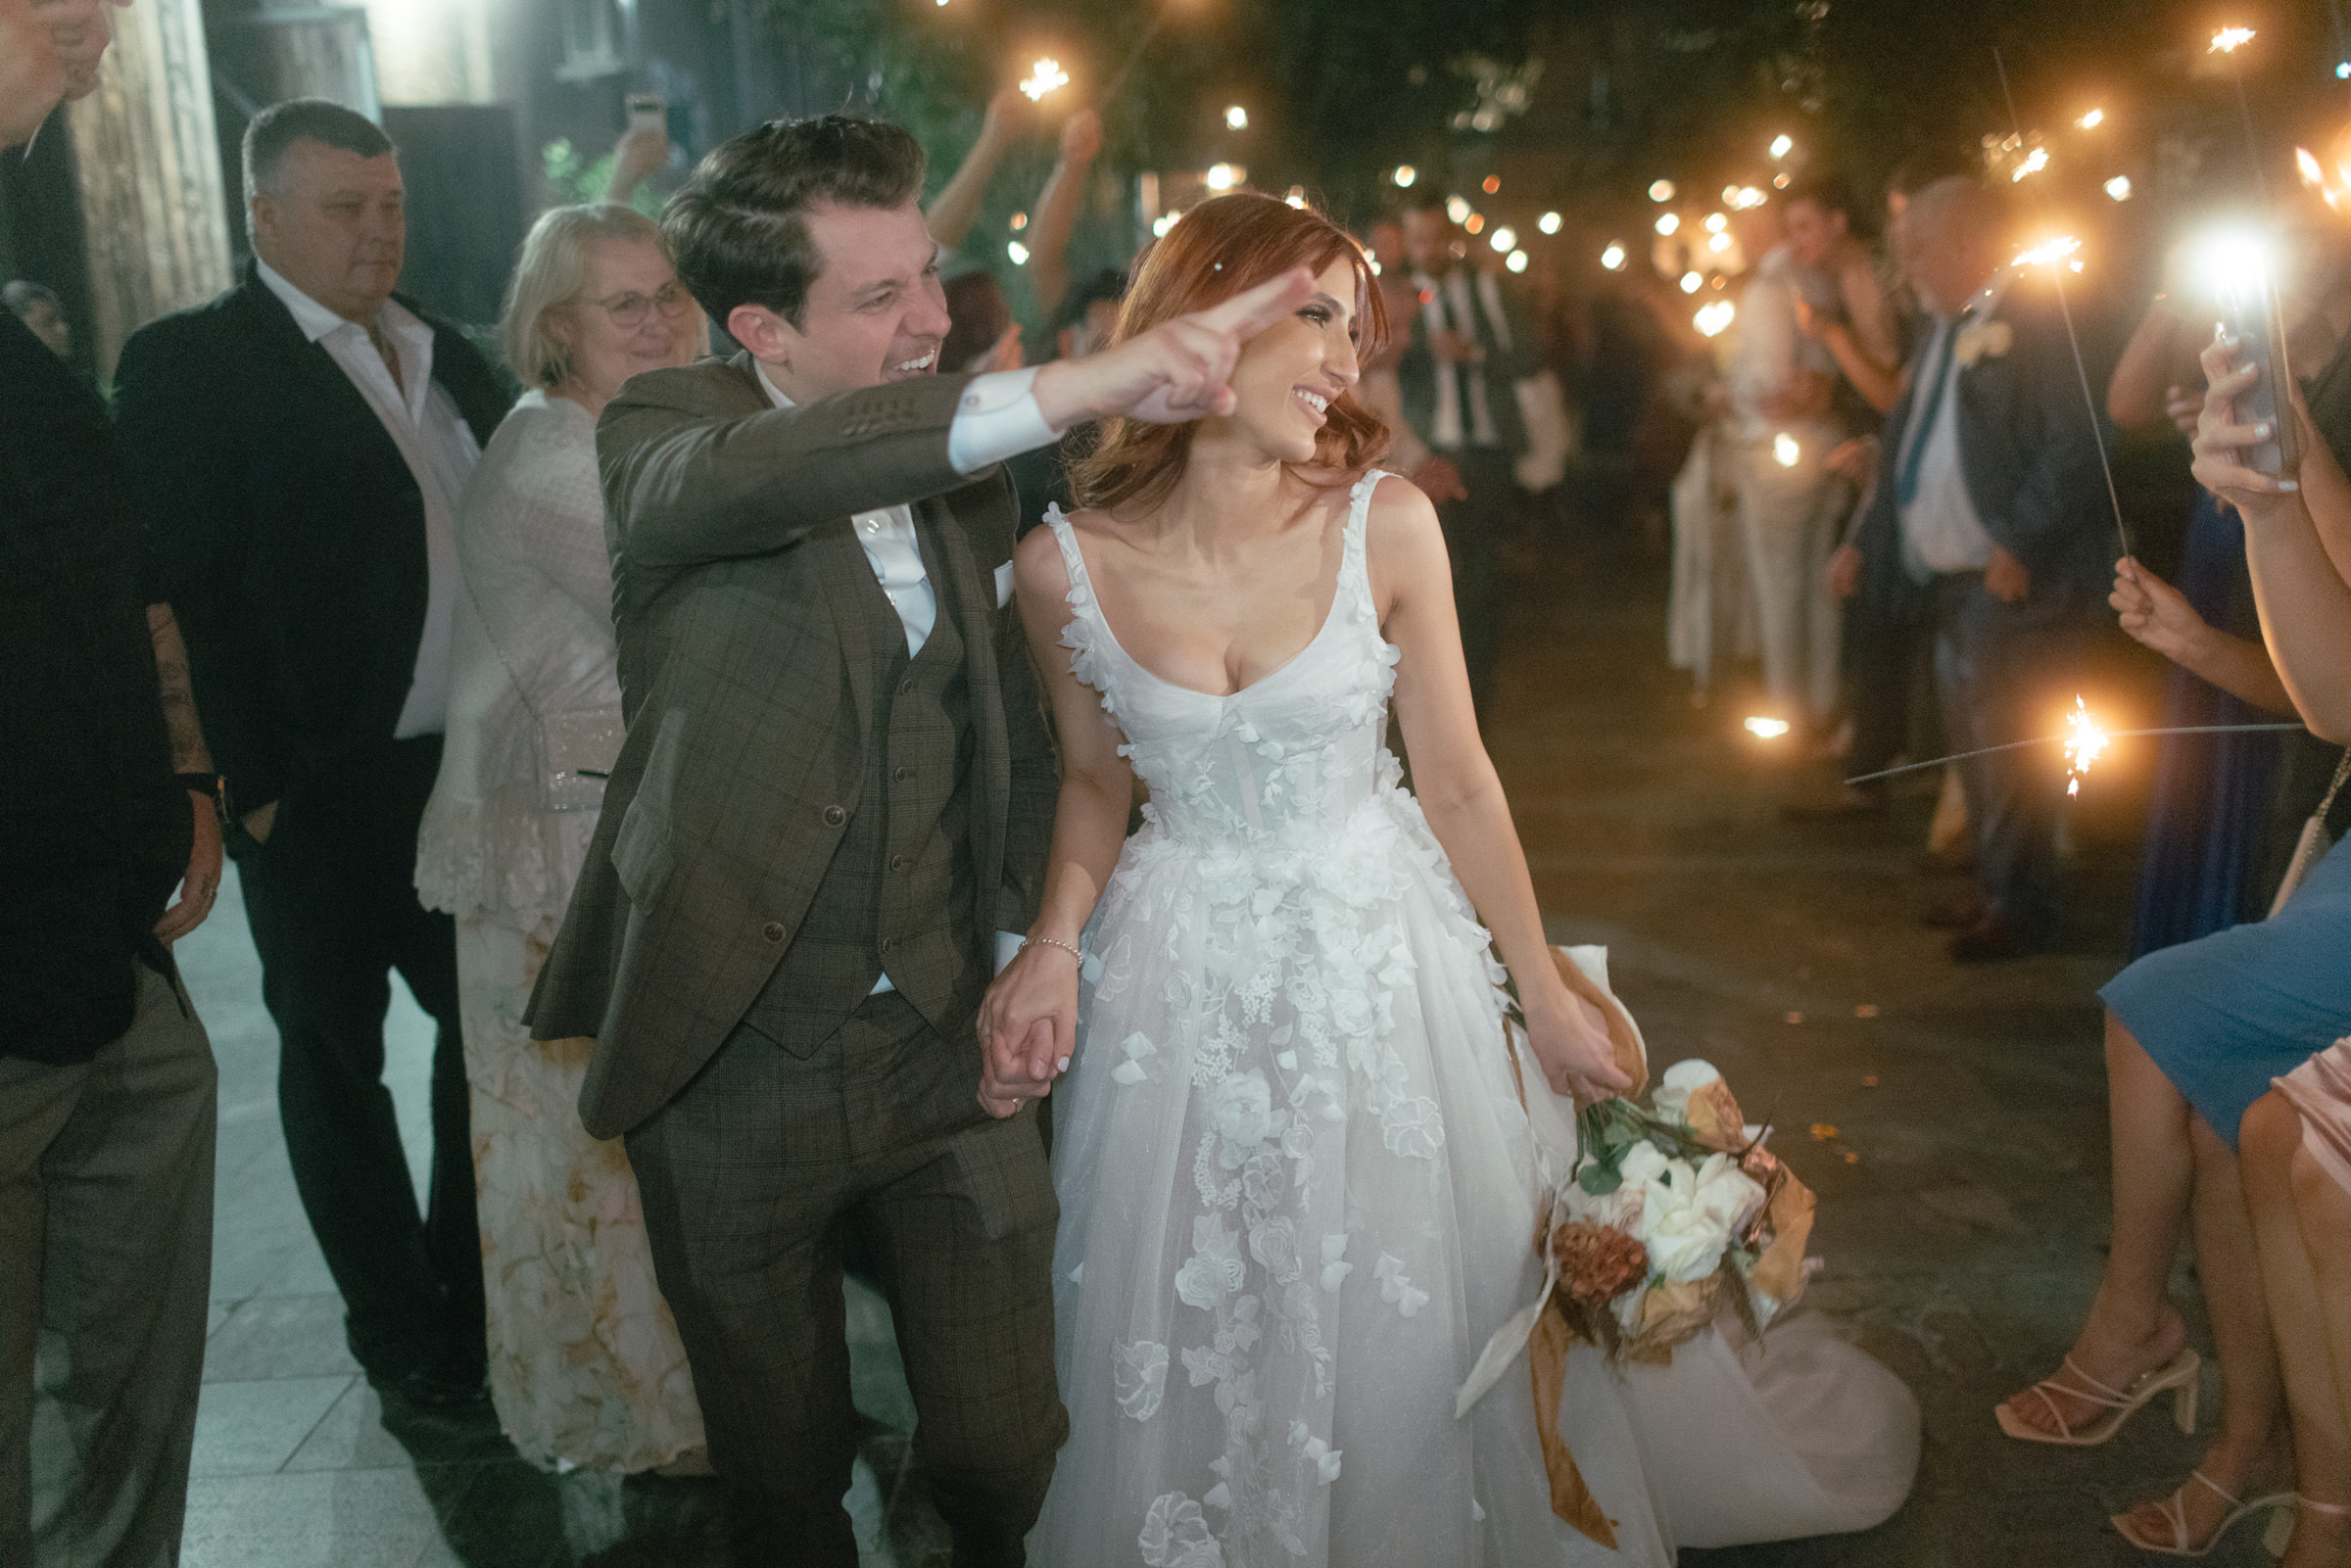 A couple leaves their wedding with all of their guests holding up long sparklers. The wedding photo shows the groom pointing saying goodbye to his guests.